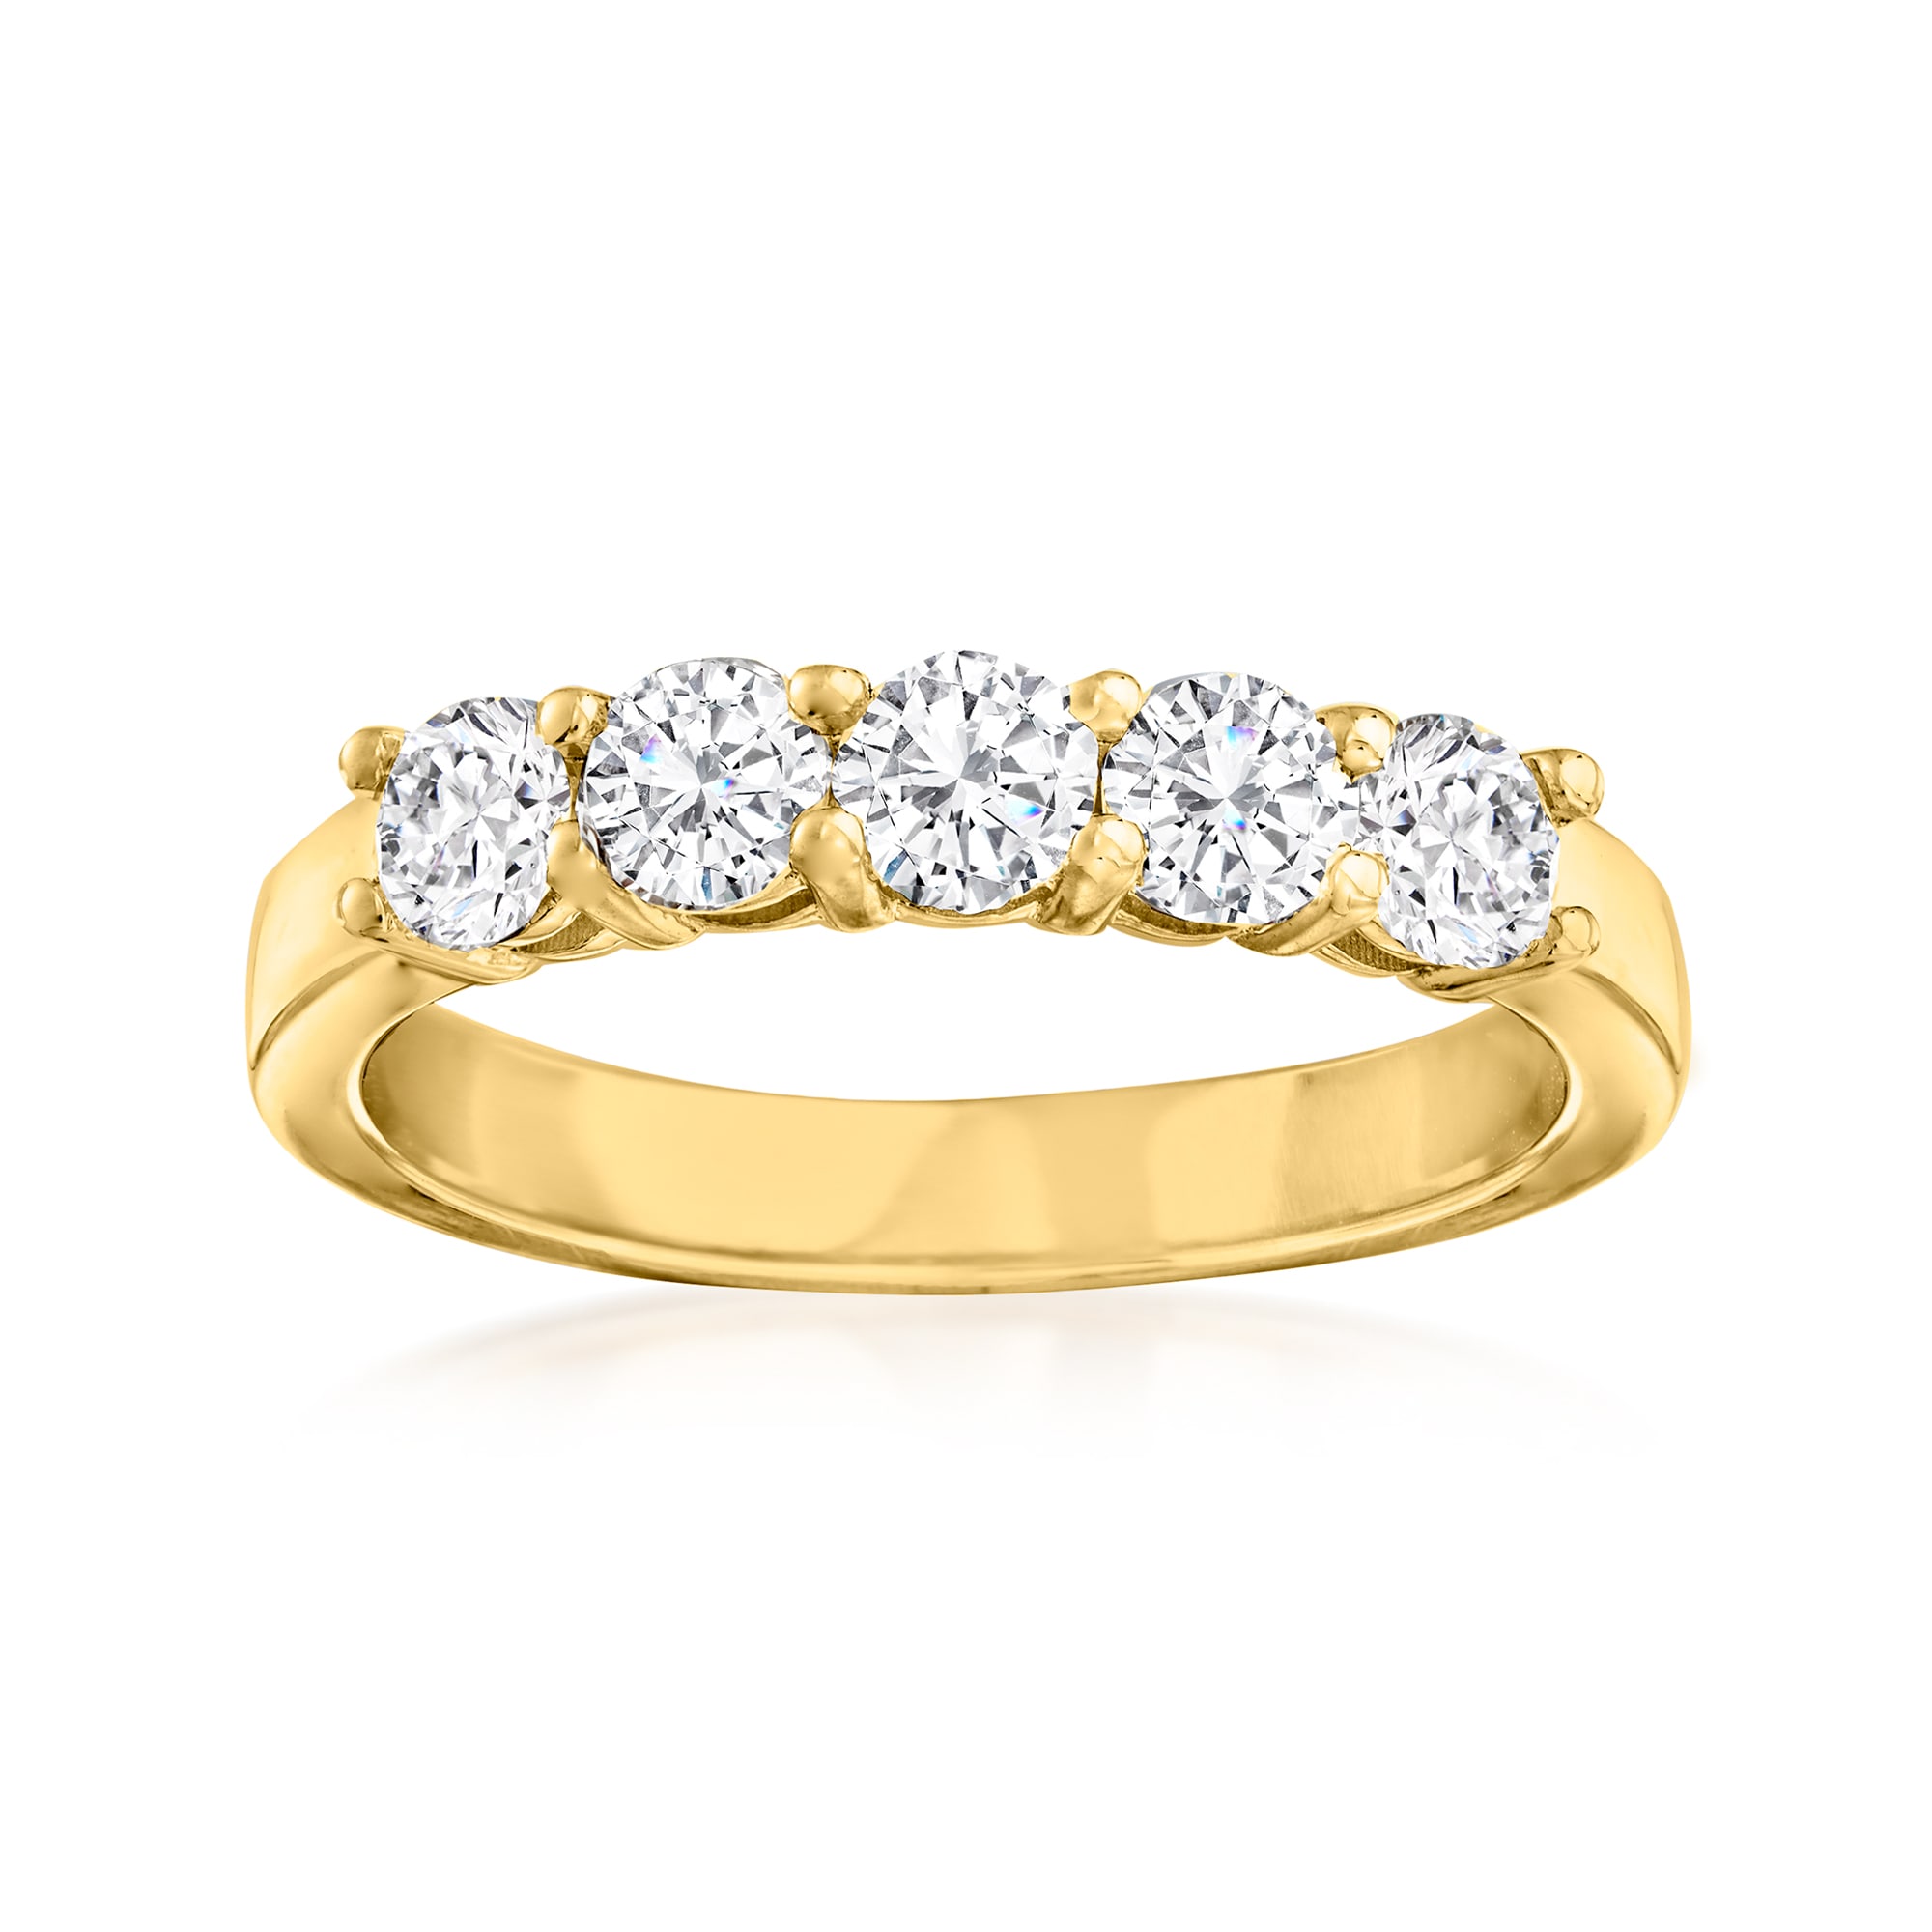 1.00 ct. t.w. Diamond Five-Stone Ring in 14kt Yellow Gold | Ross-Simons